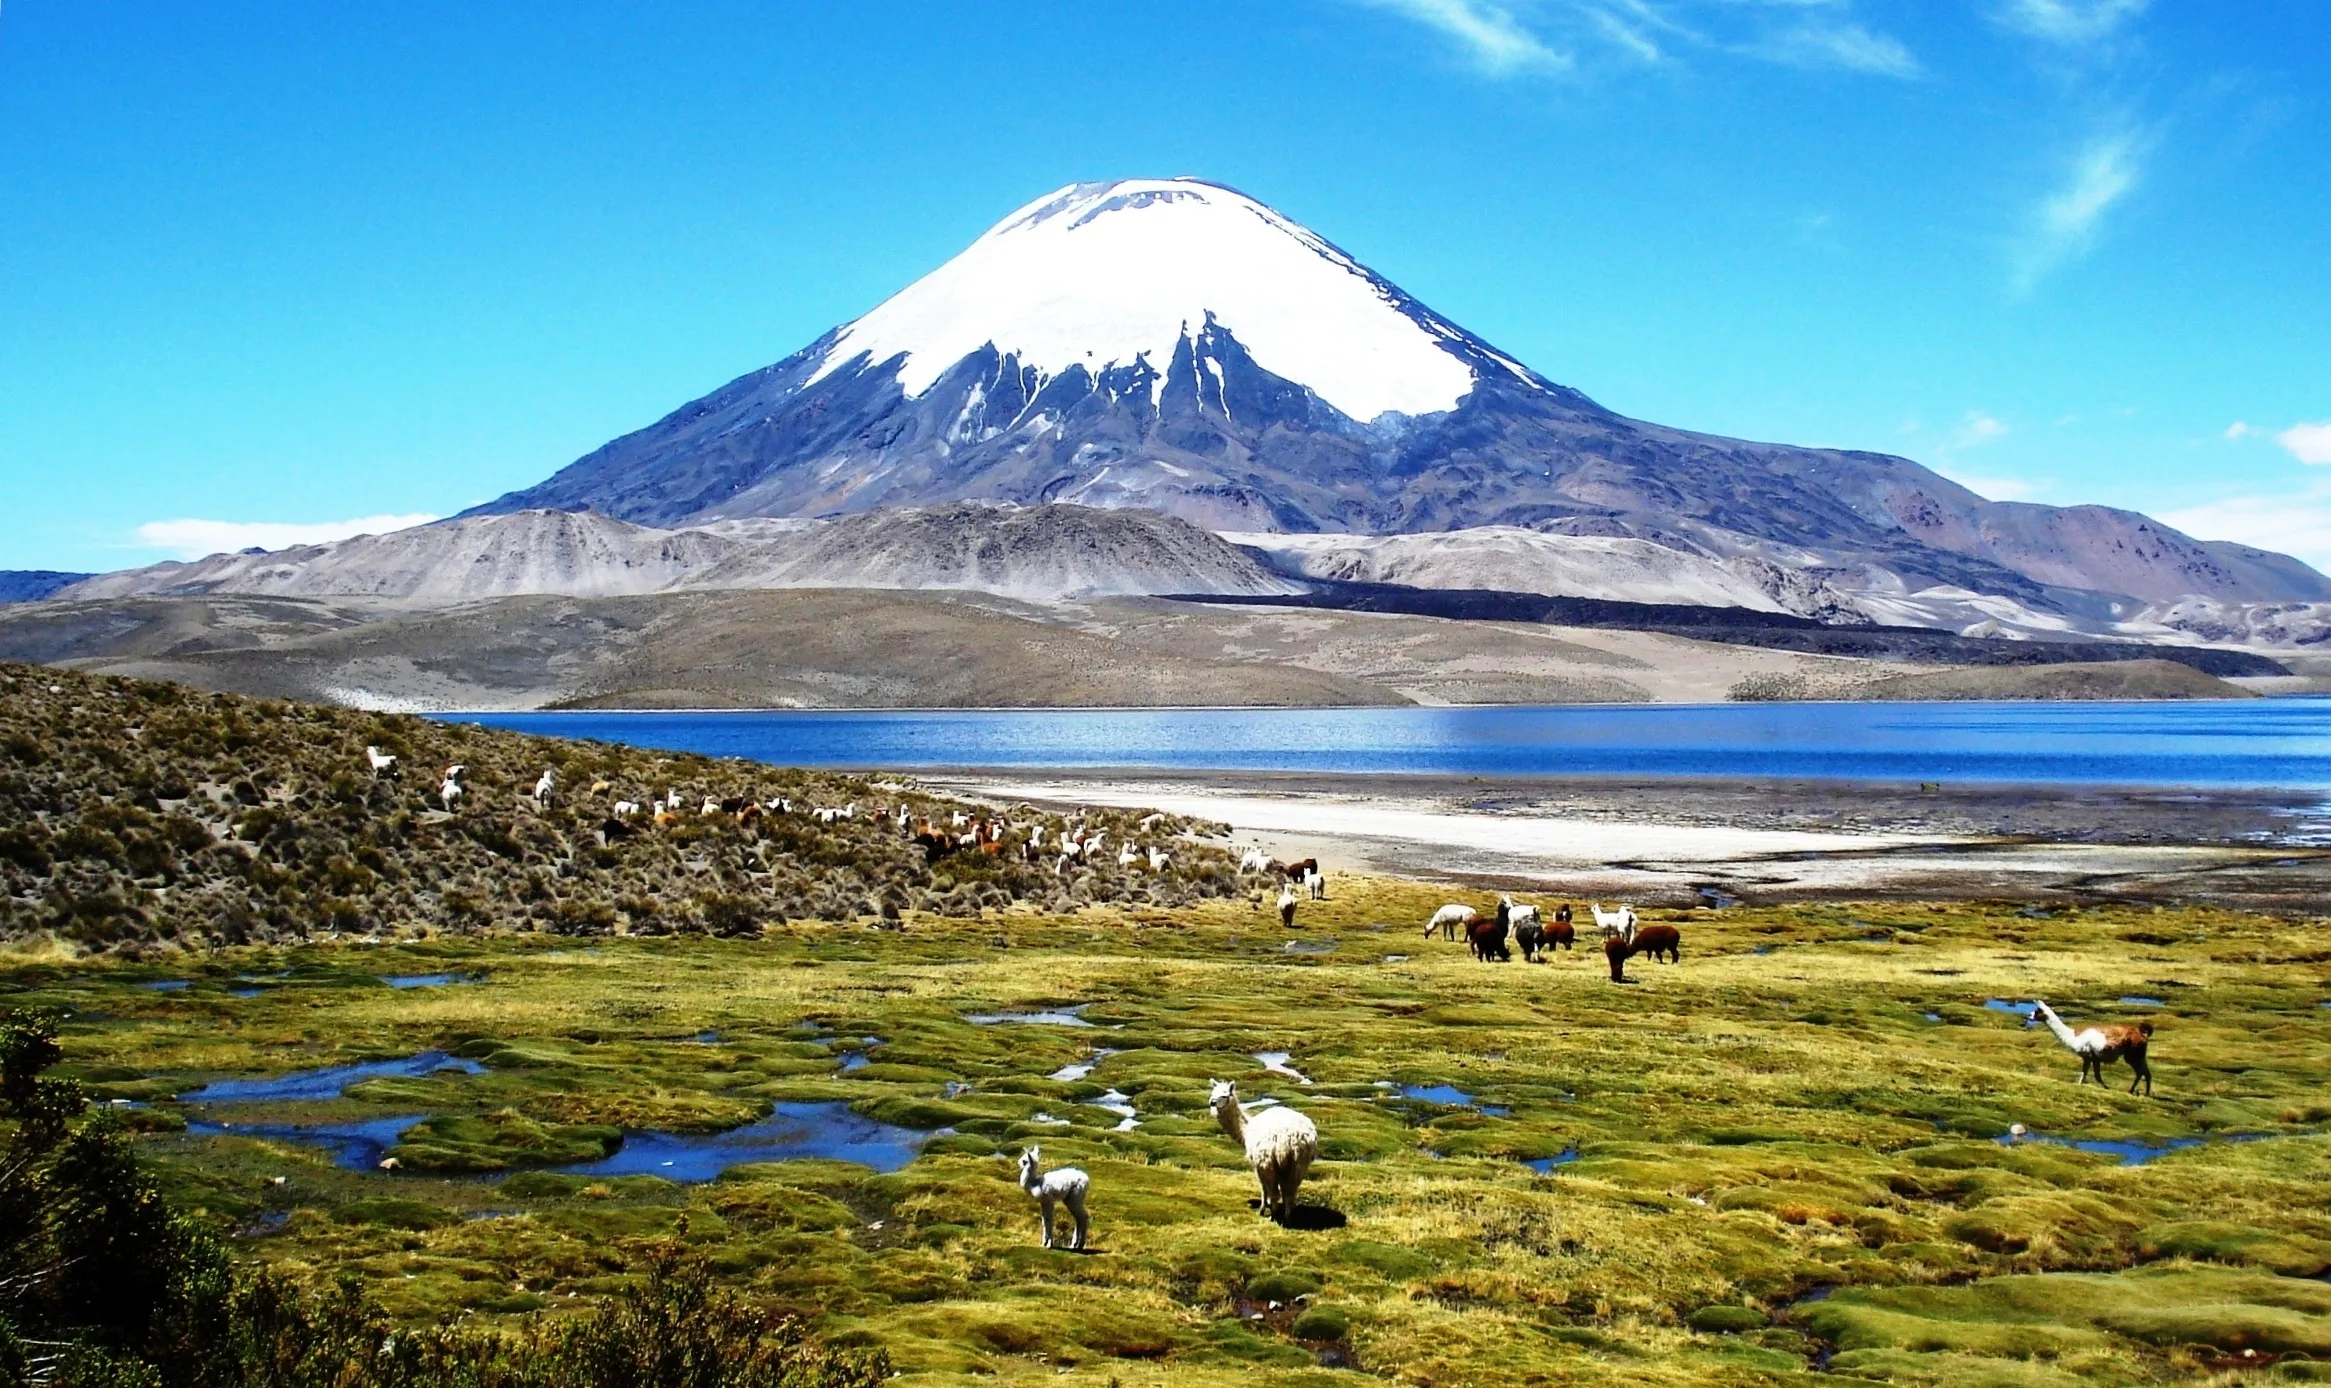 Parinacota Volcano in Chile, South America | Volcanos - Rated 1